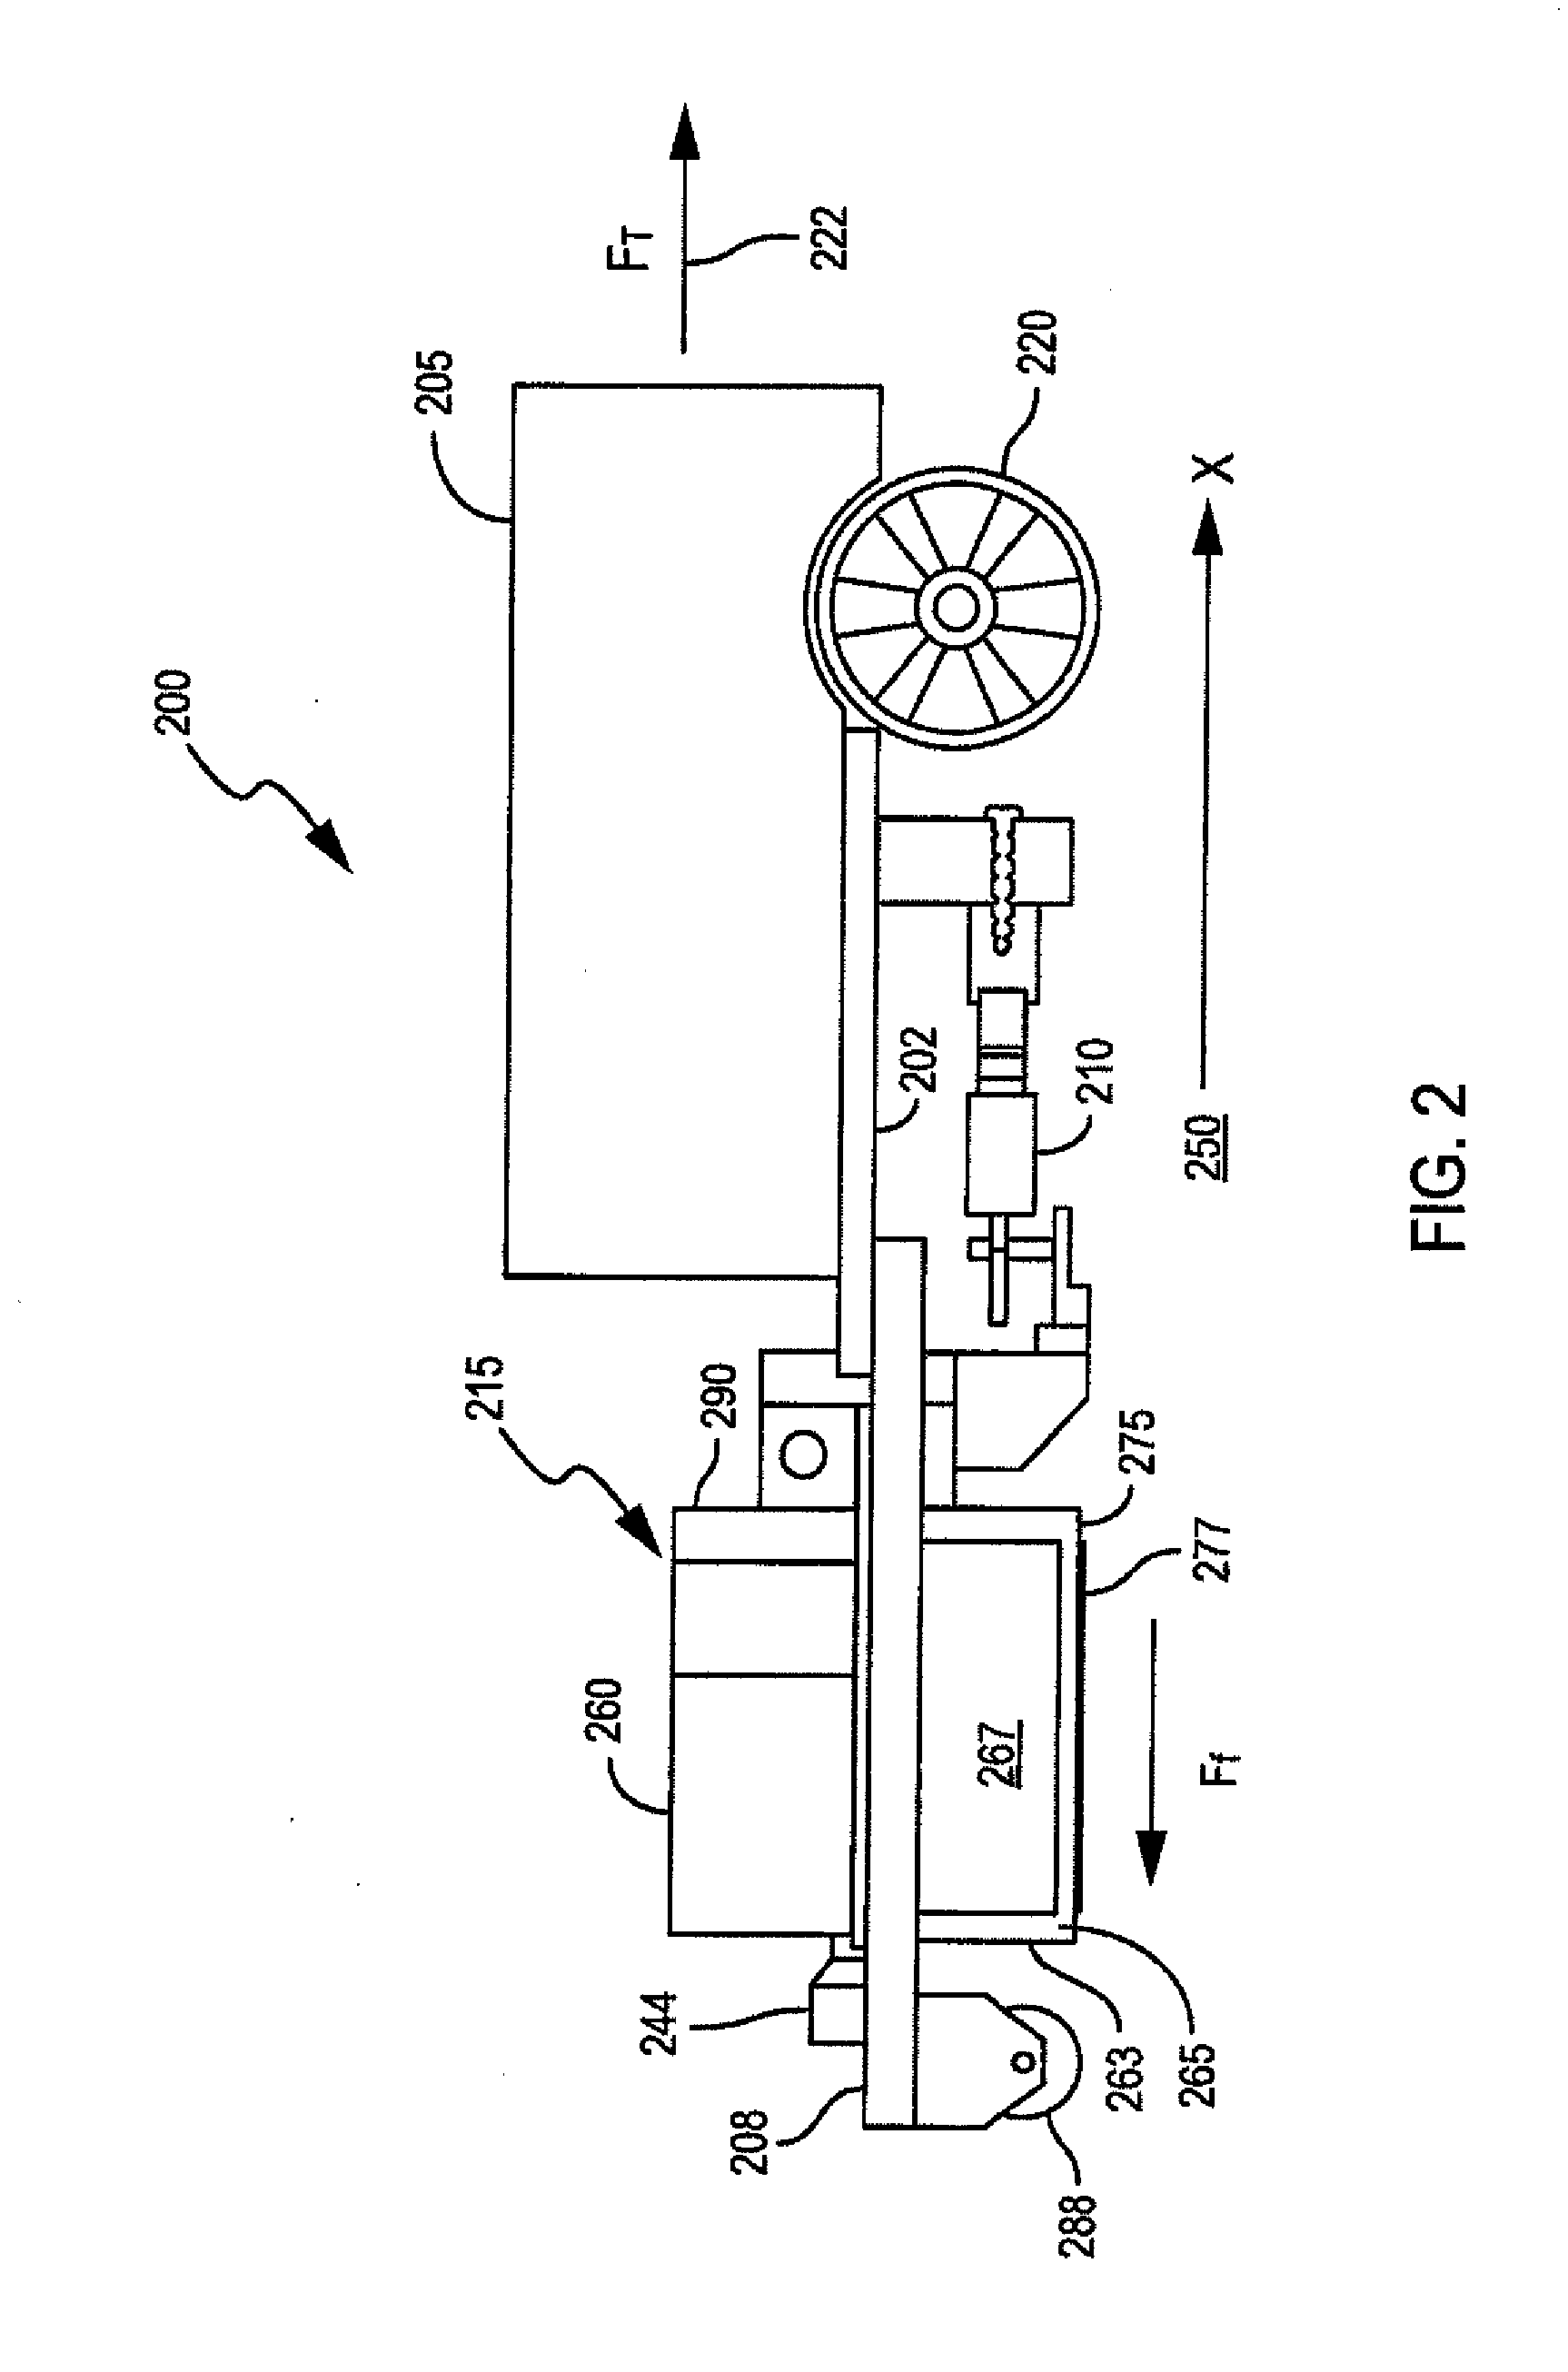 Intrinsically-calibrated tribometer